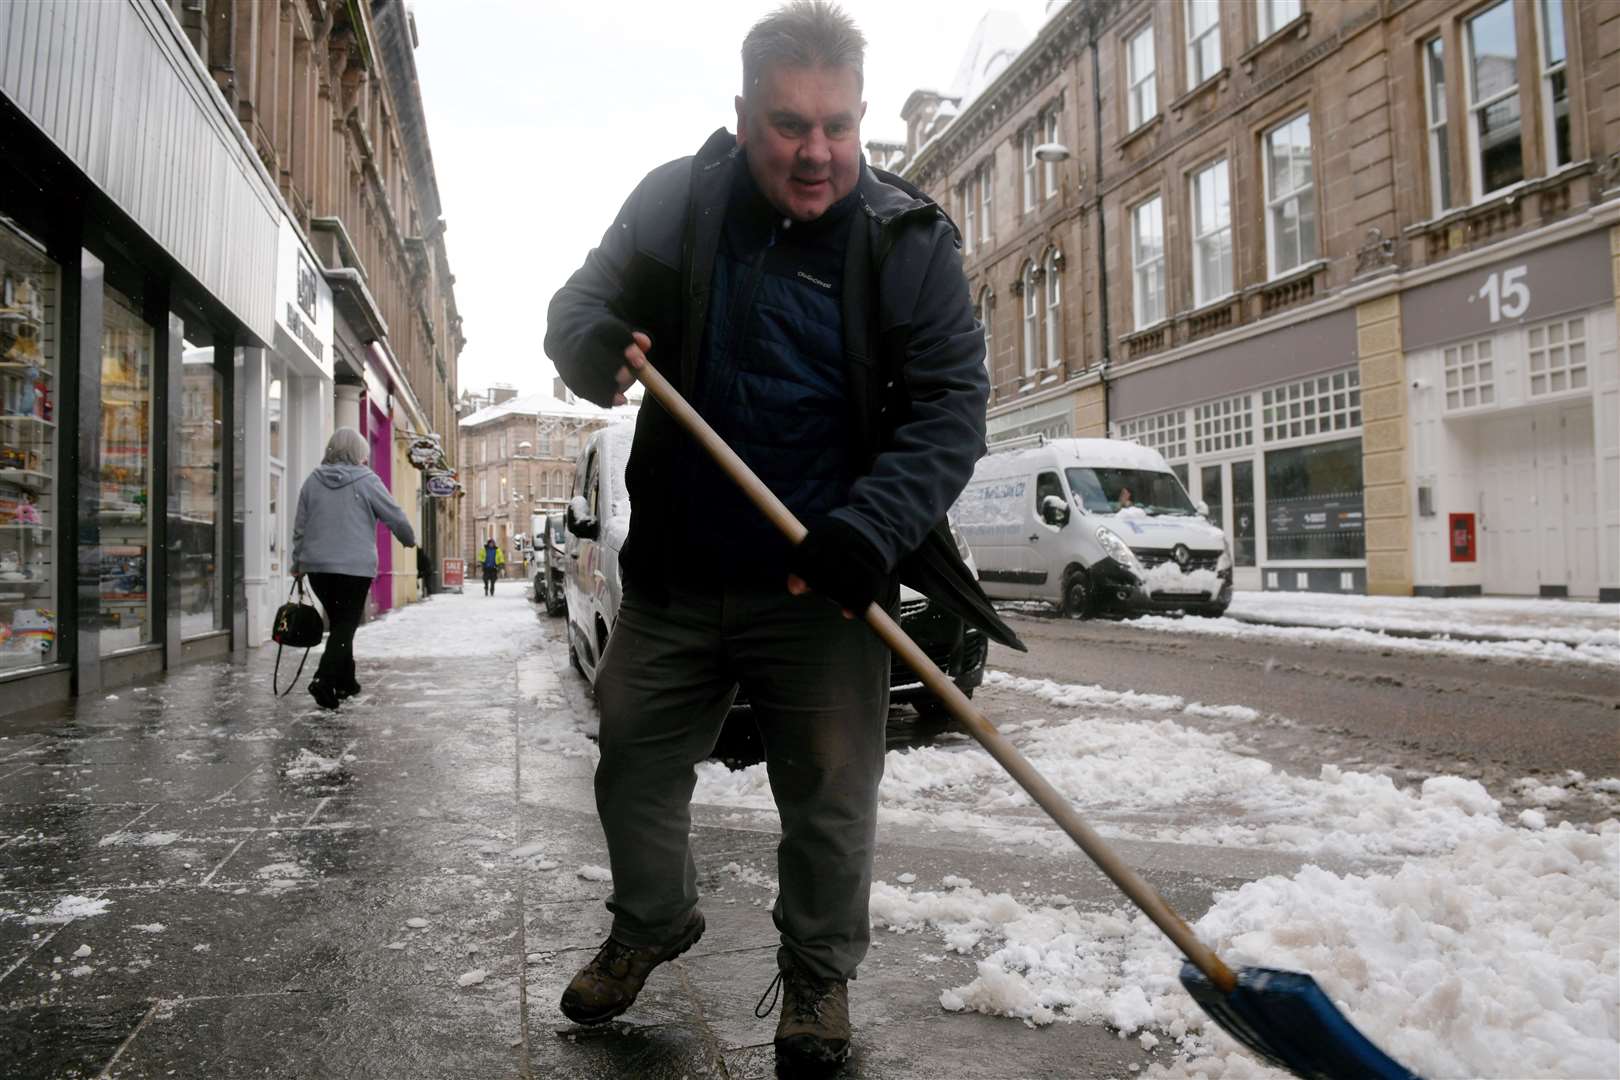 Shovelling the snow on Union Street. Picture: James Mackenzie